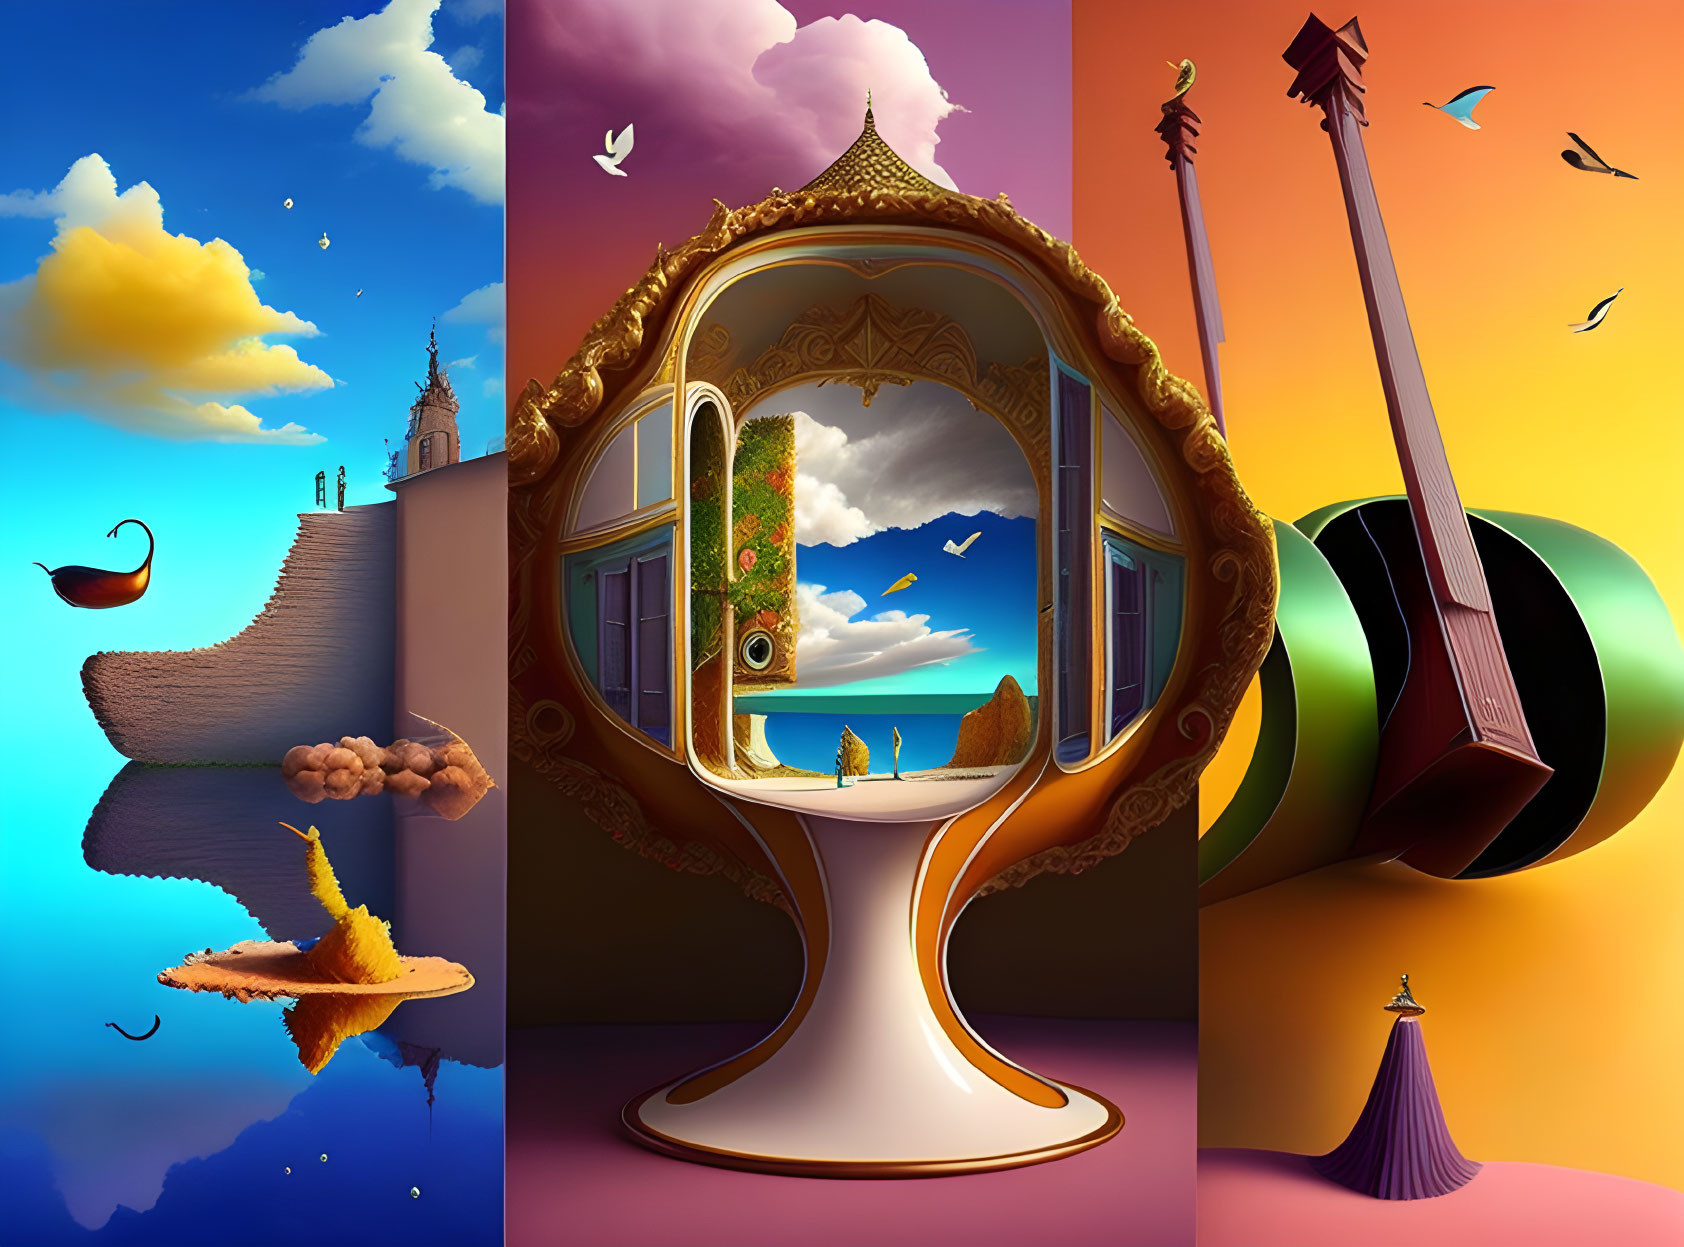 Surreal collage: golden mirror, rural scene, guitar, stretched horizon, colorful pie chart.